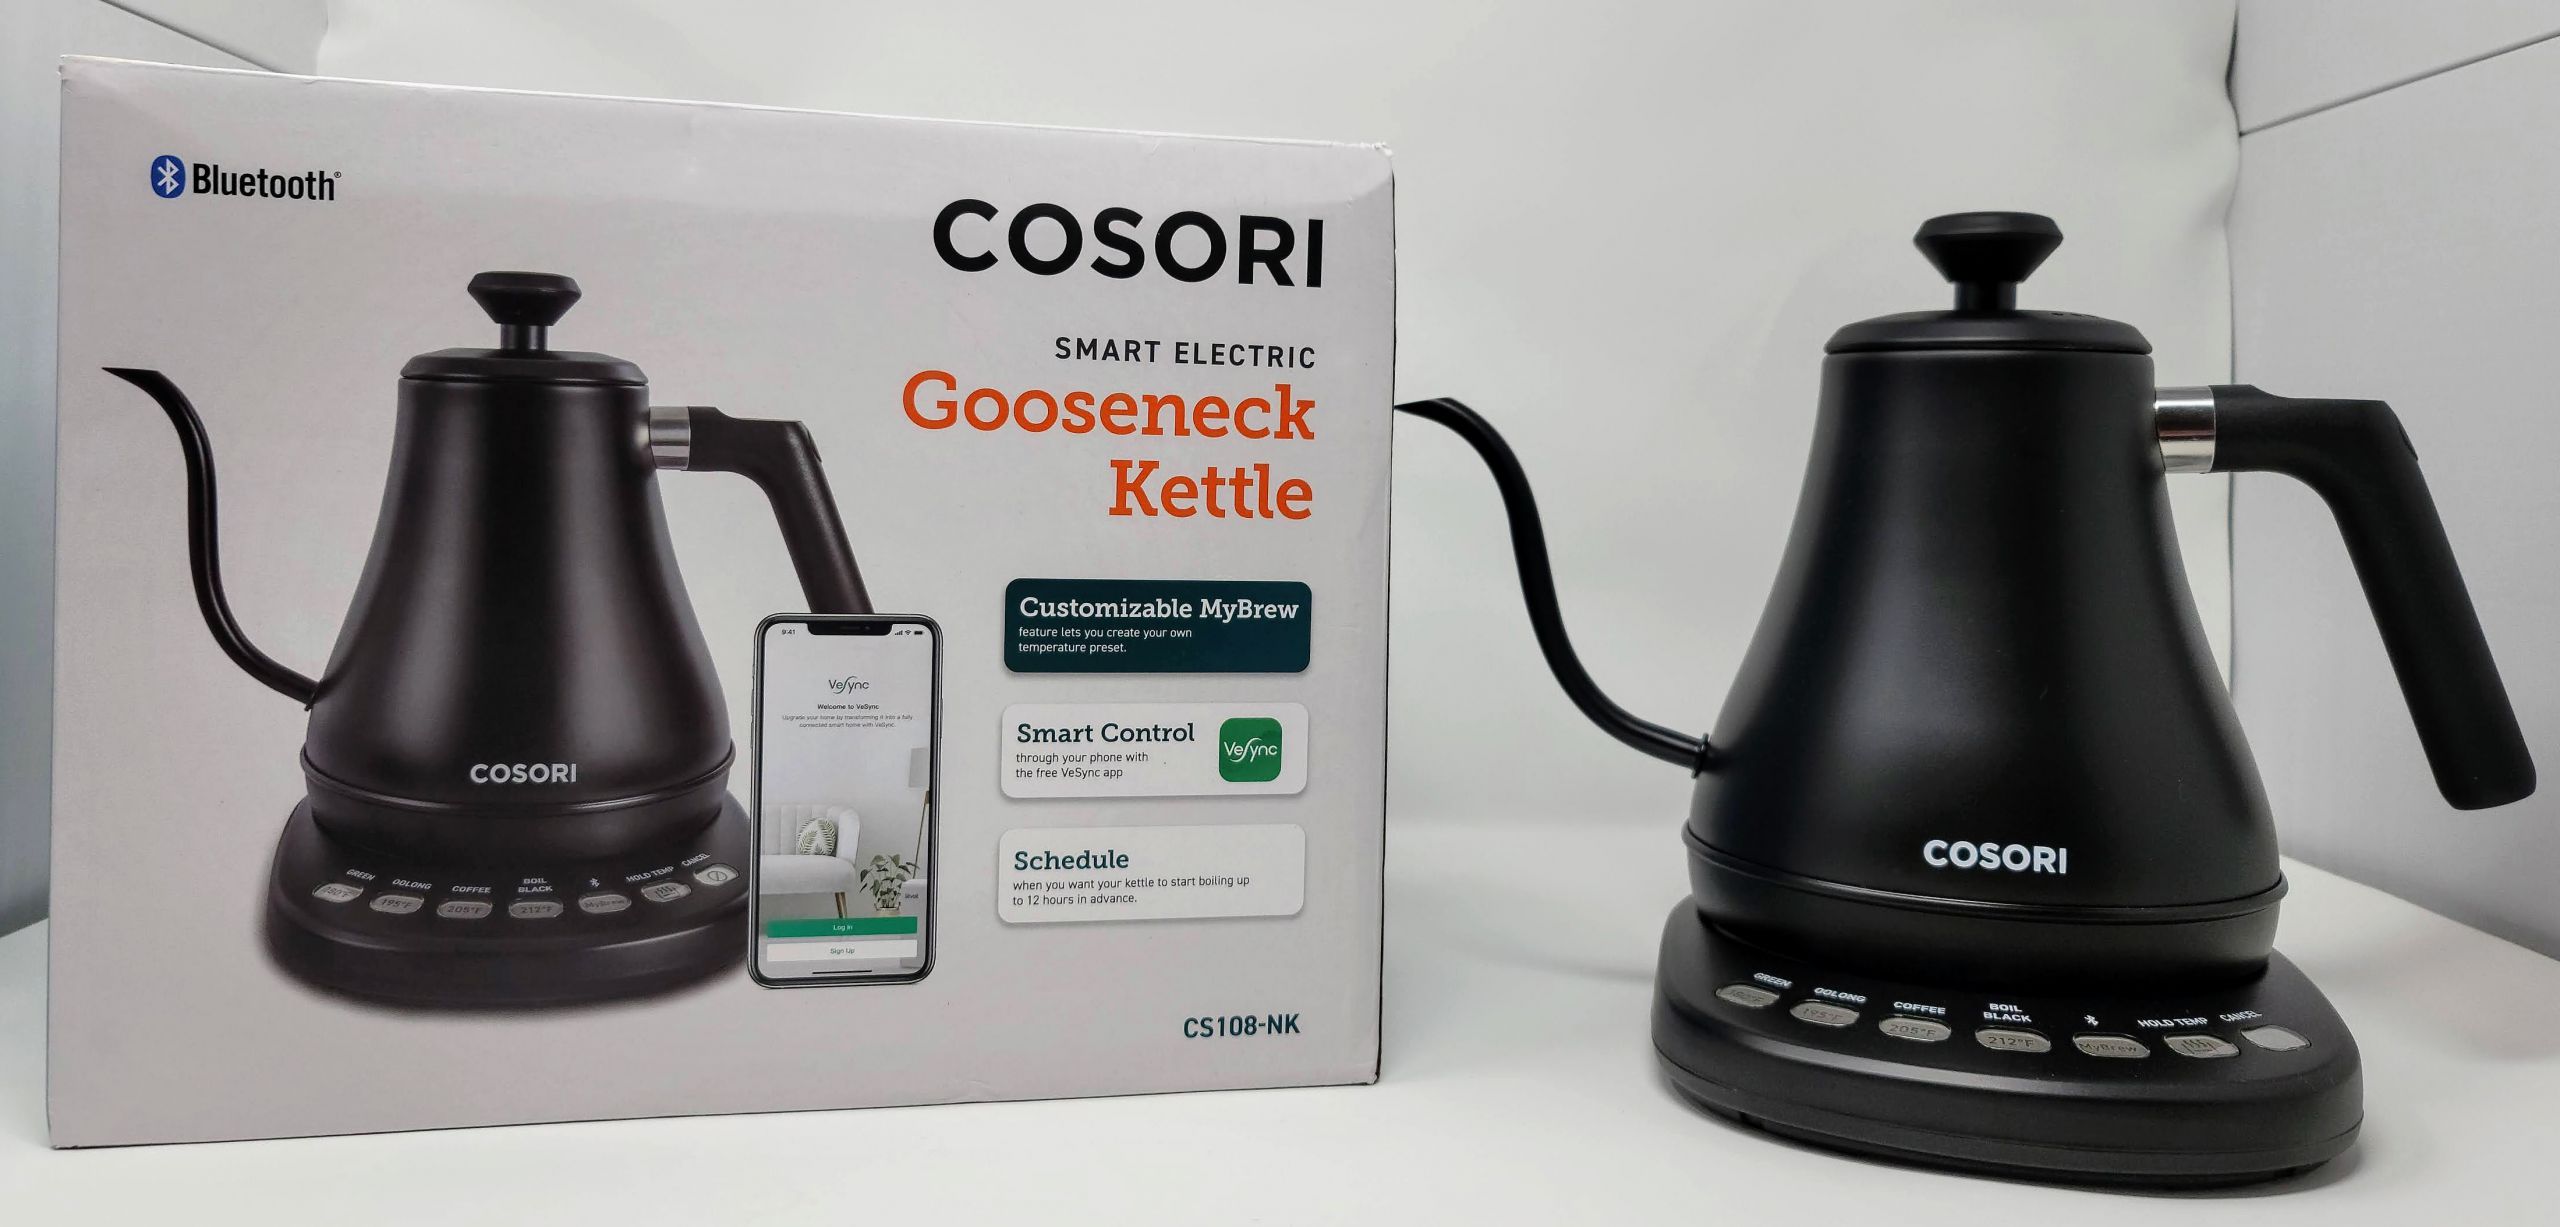 https://the-gadgeteer.com/wp-content/uploads/2021/03/cosori-kettle-1-scaled.jpg